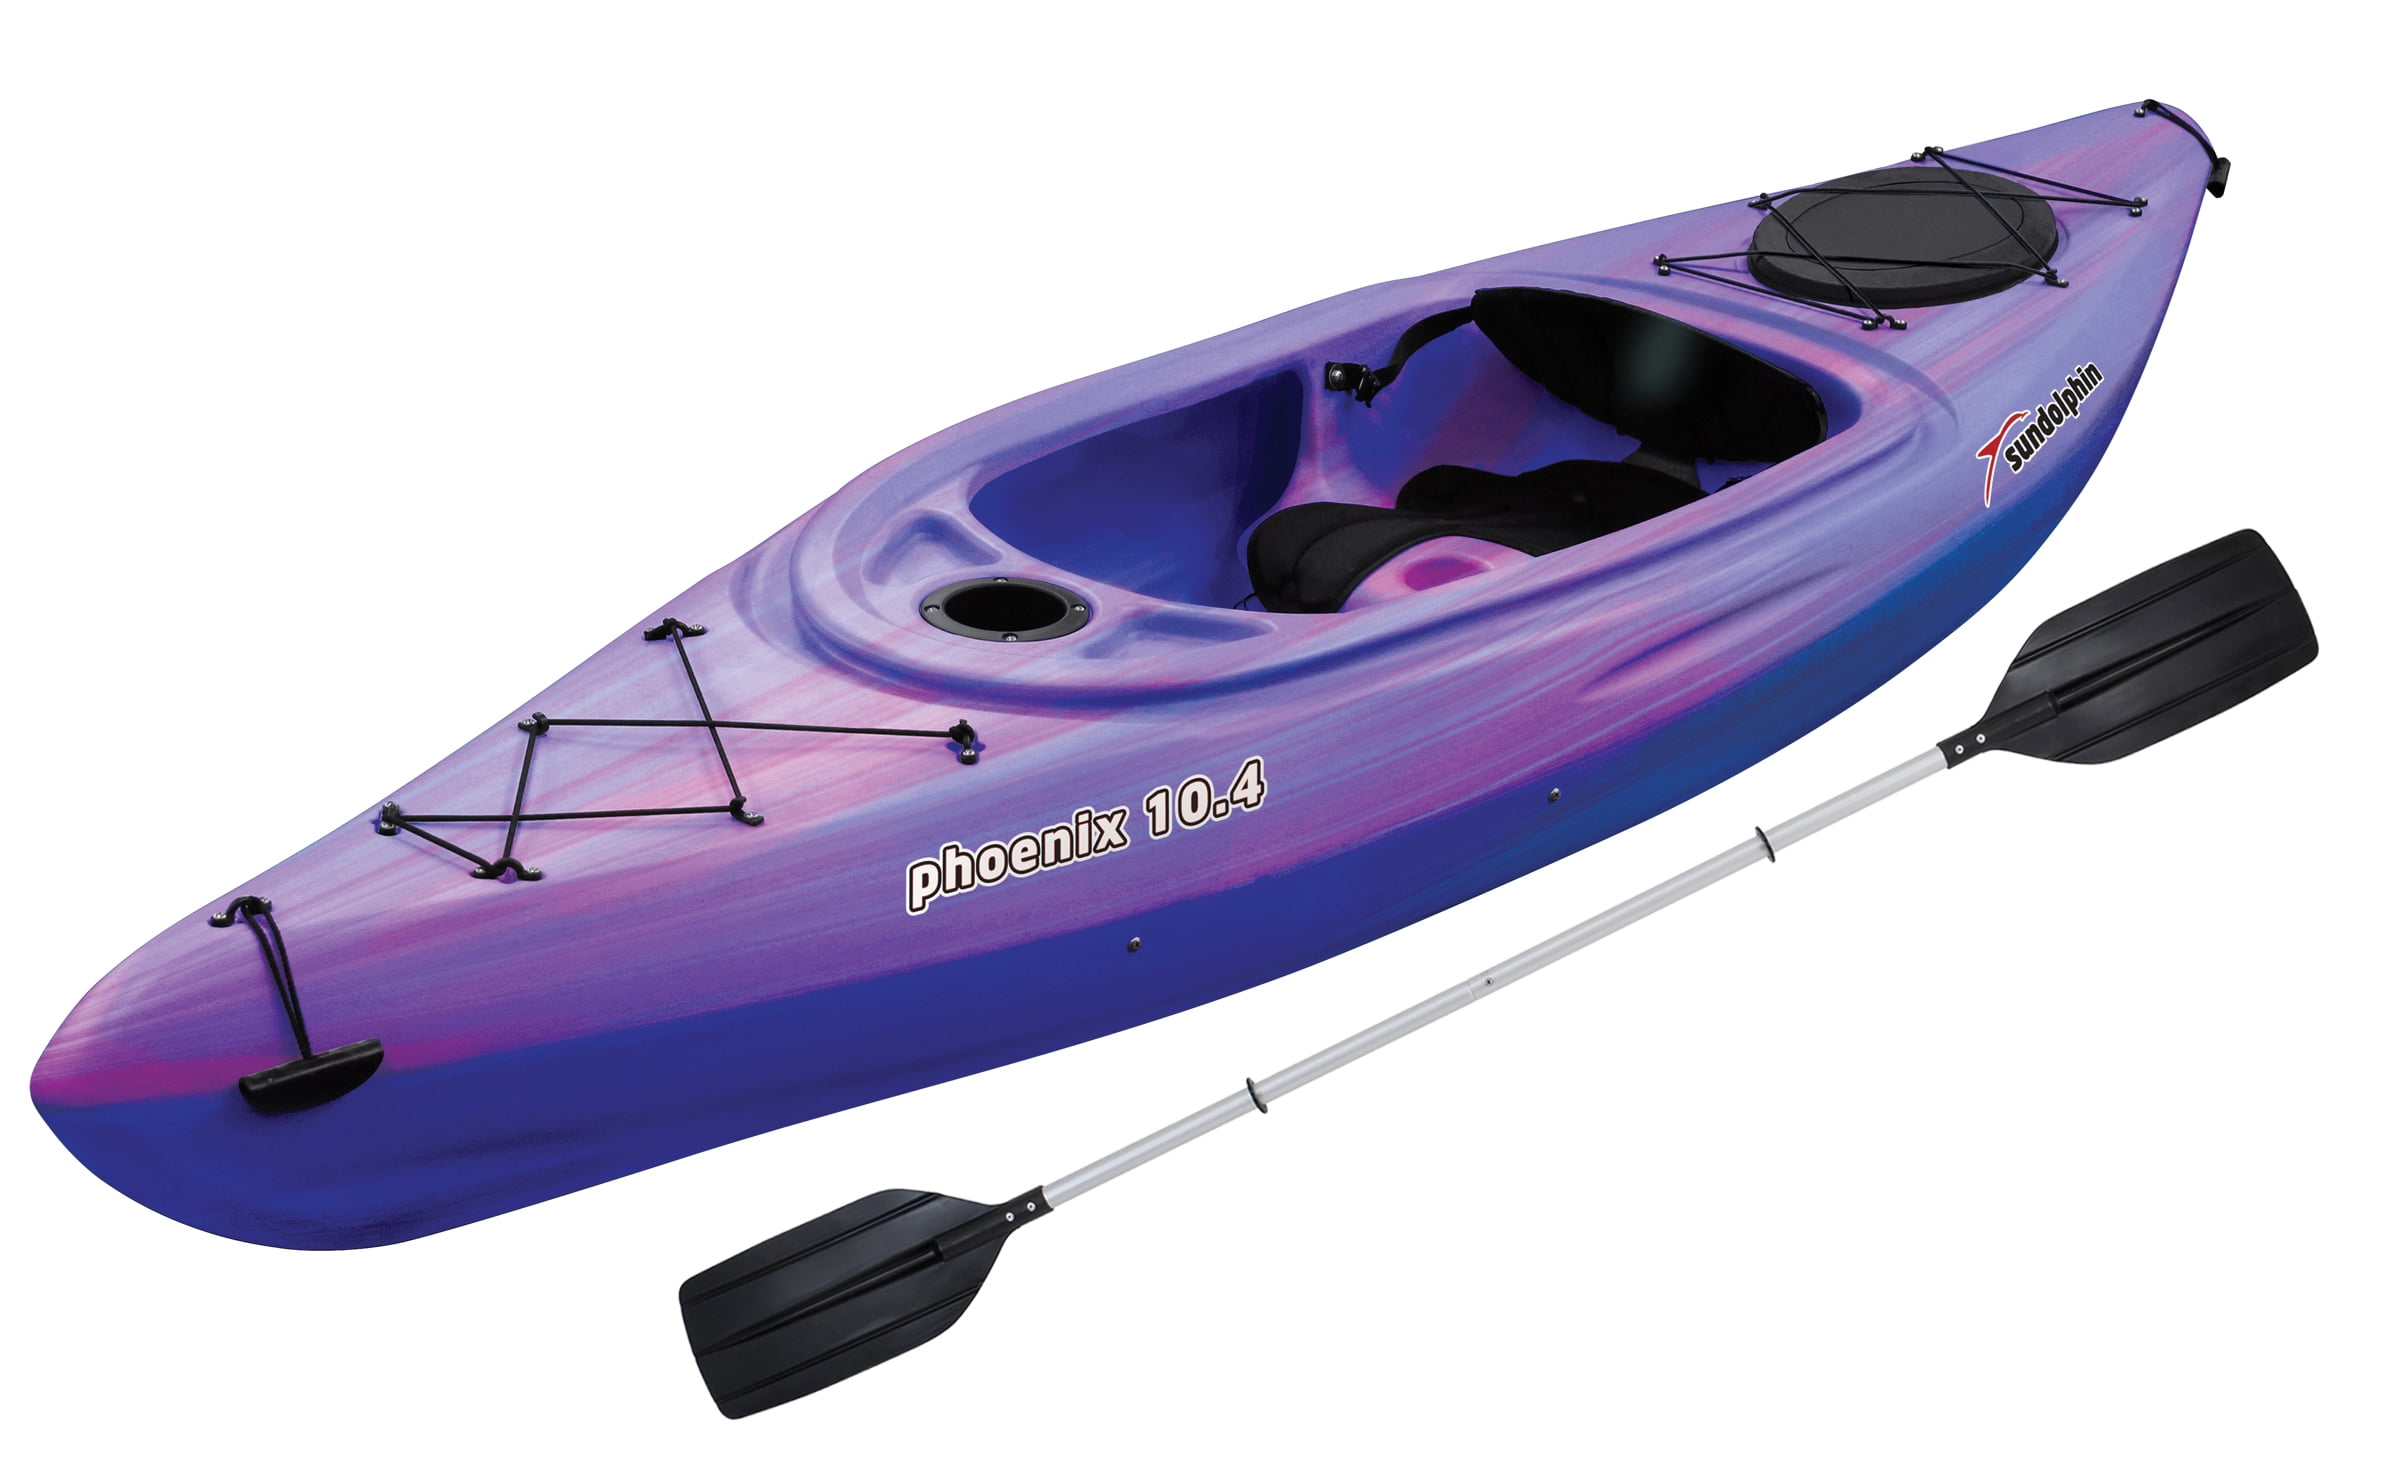 Sun Dolphin Phoenix 10 4 Sit In Kayak Pink Purple Paddle Included